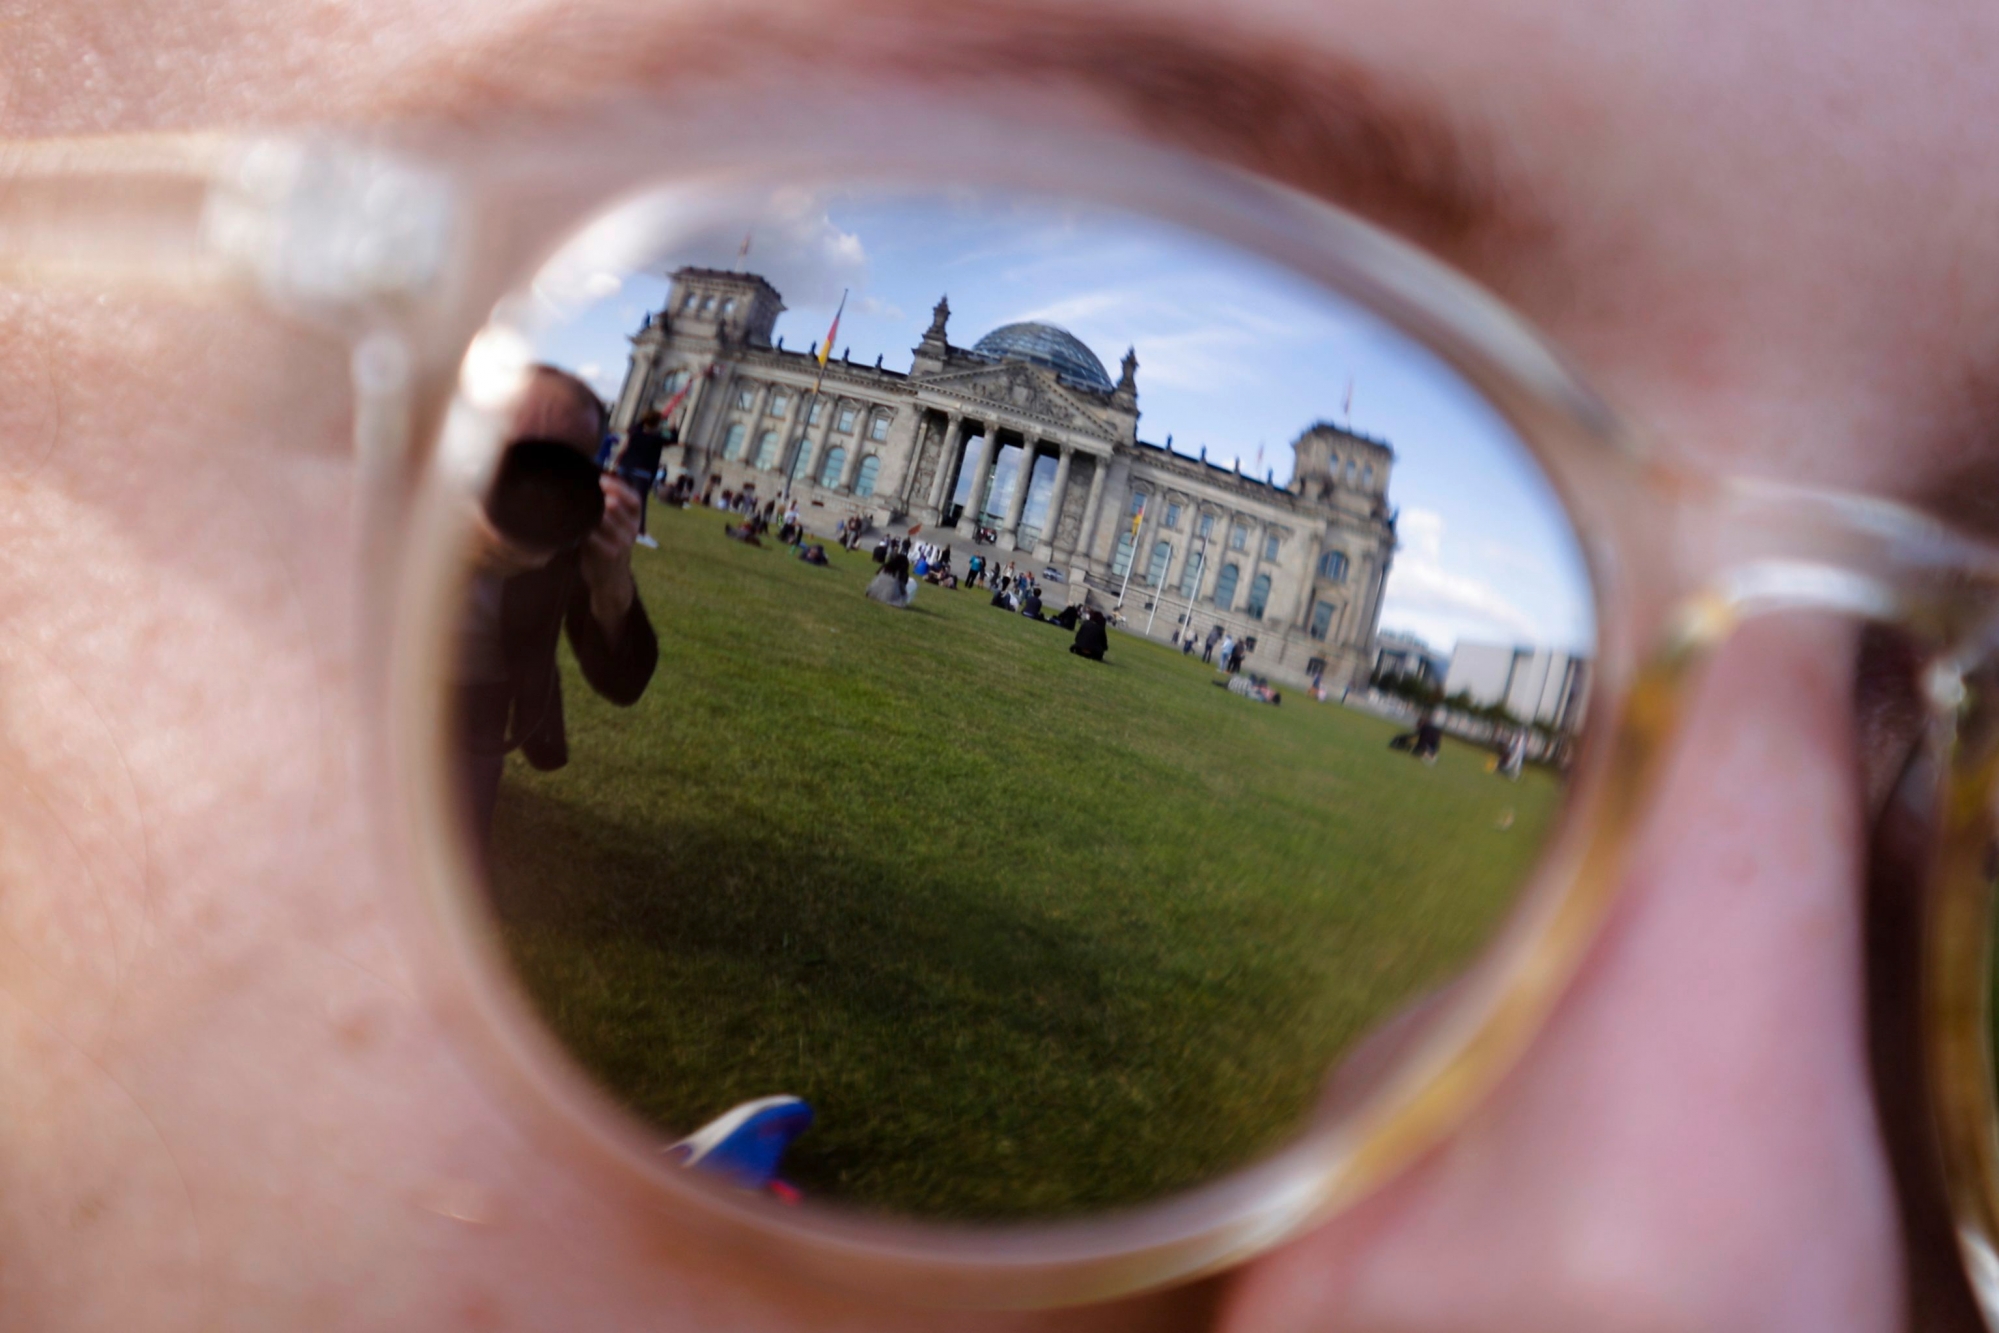 FILE - The Sept. 22, 2017 file photo shows the Reichstag building, which host the German parliament Bundestag as it is reflected in the sunglasses of a woman in Berlin. German Interior Minister Horst Seehofer will inform in a press conference on Tuesday, Jan. 8, 2019 on an alleged hacking case that saw hundreds of politicians' and celebrities' private information posted online. (AP Photo/Markus Schreiber, file) Germany Politicians Hacked